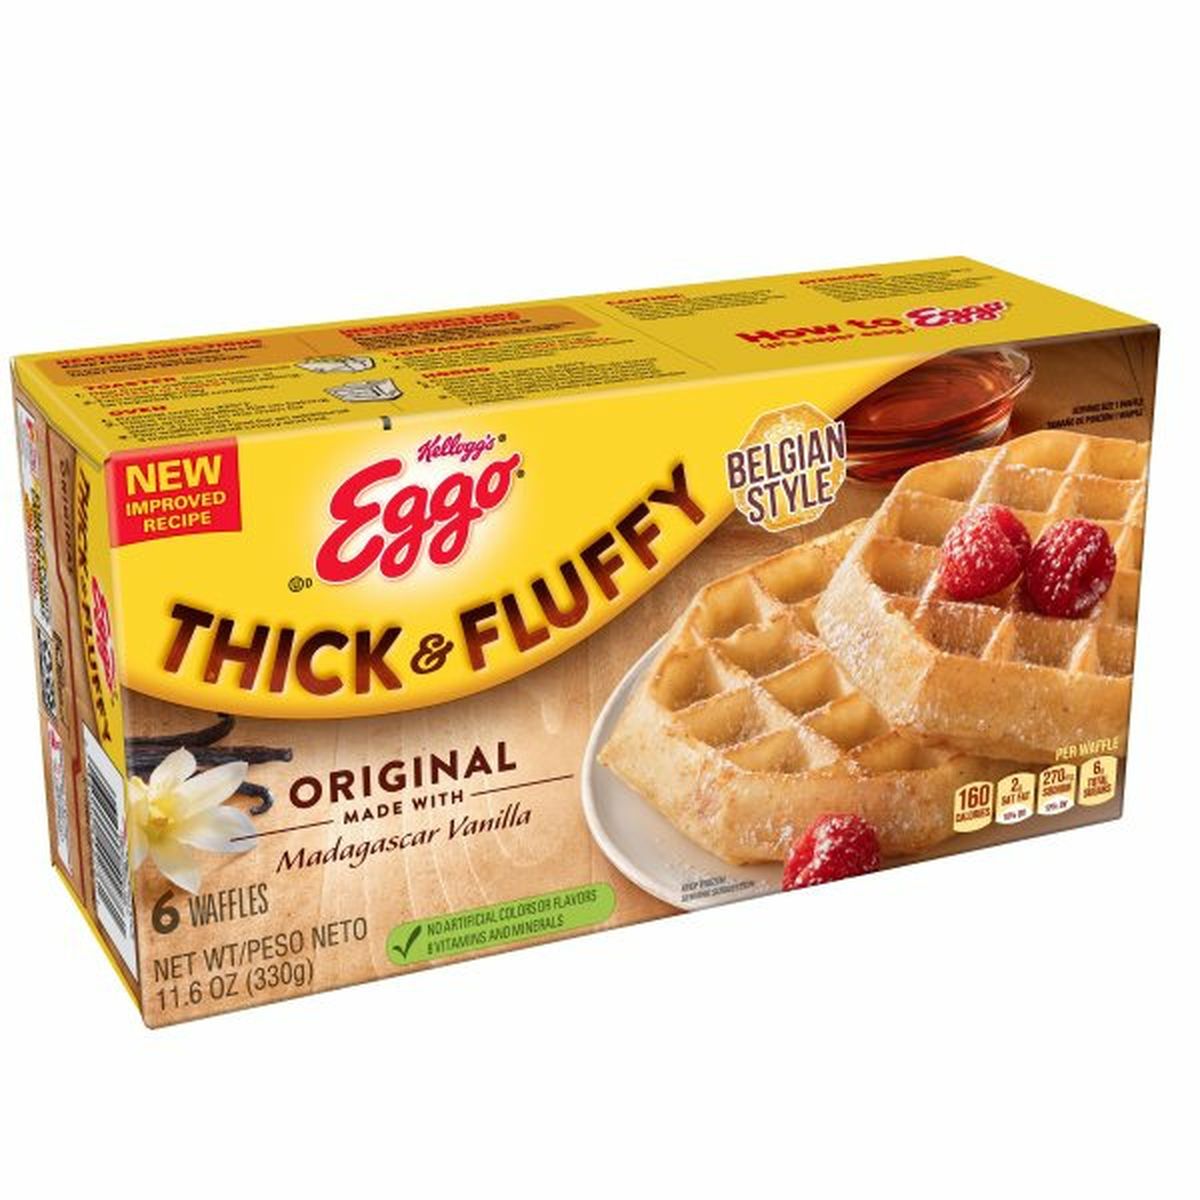 Calories in Eggo Thick and Fluffy Frozen Breakfast Eggo Thick and Fluffy, Frozen Waffles, Original, Easy Breakfast, 6ct 11.6oz